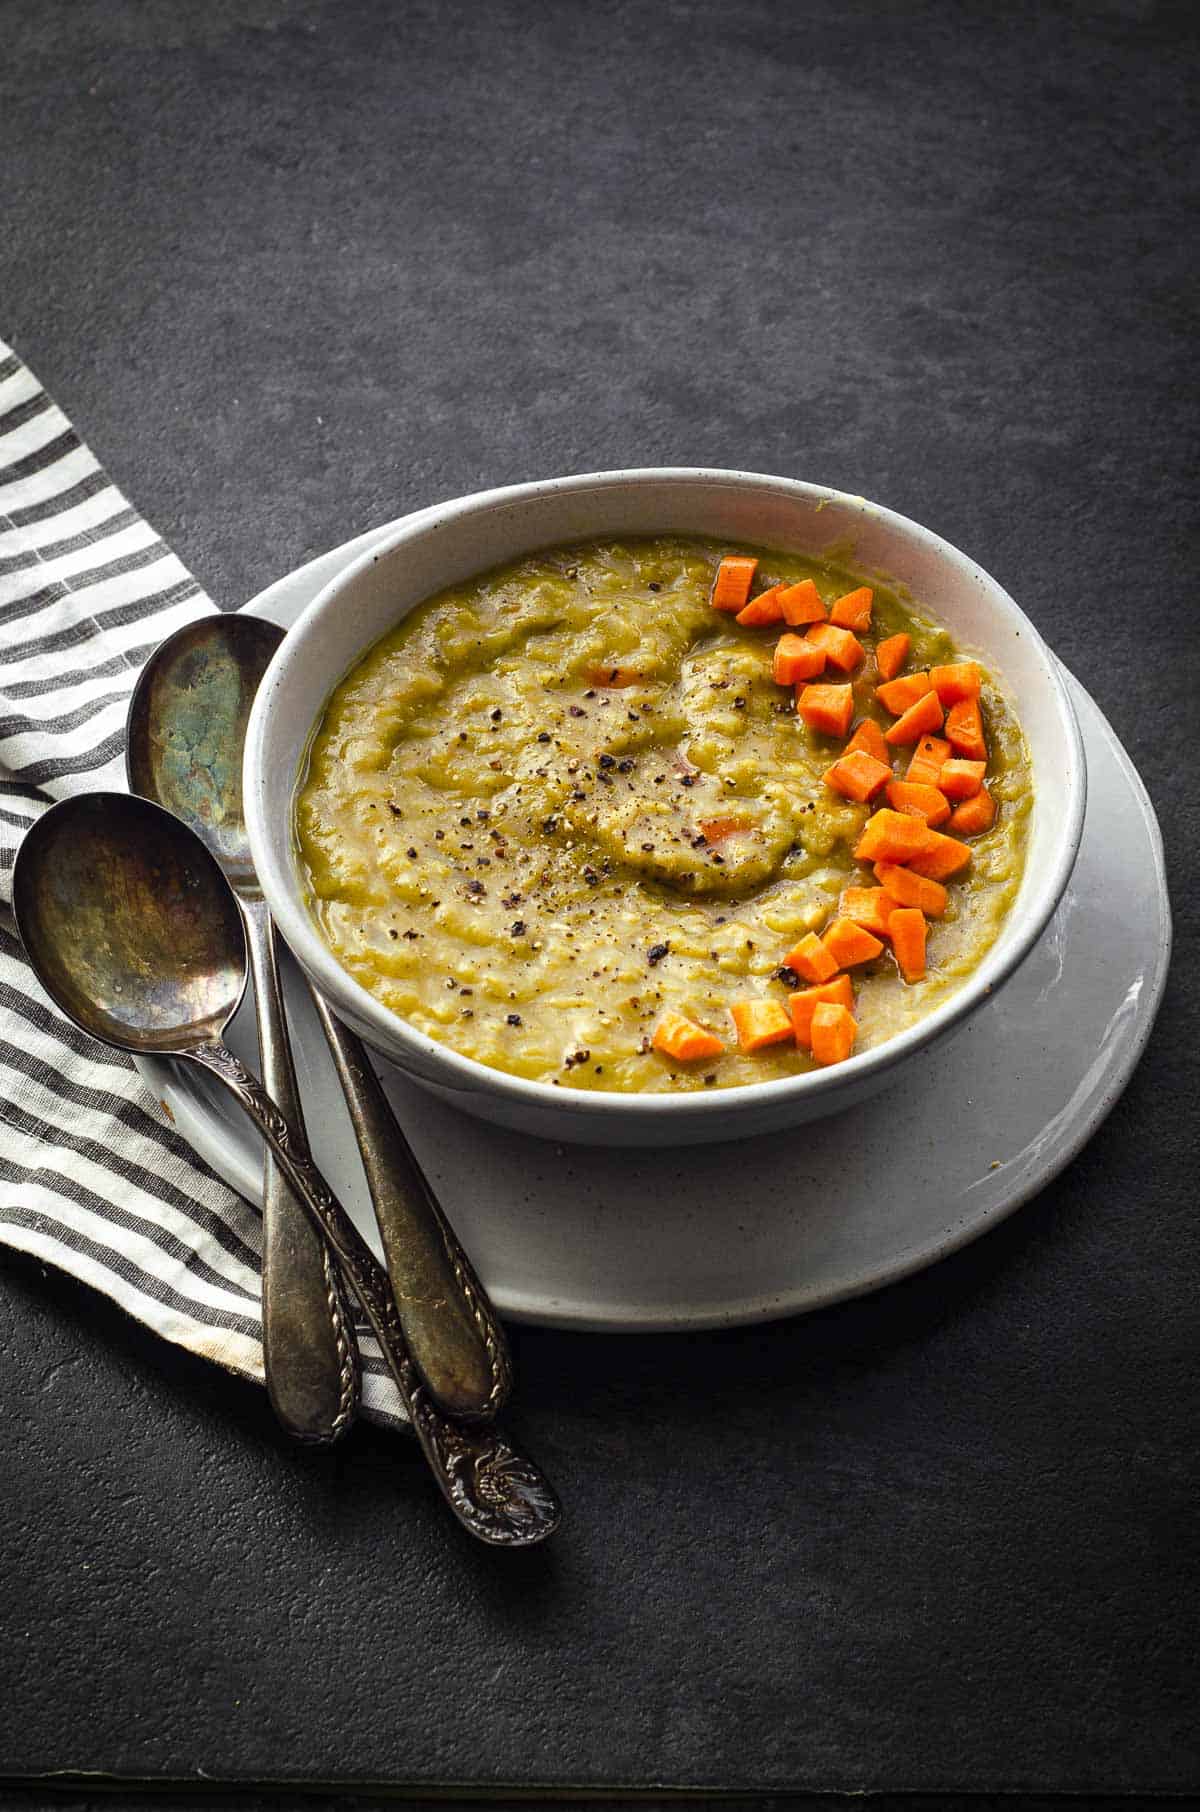 45 degree angle photo of a white bowl with split pea soup with carrots on top